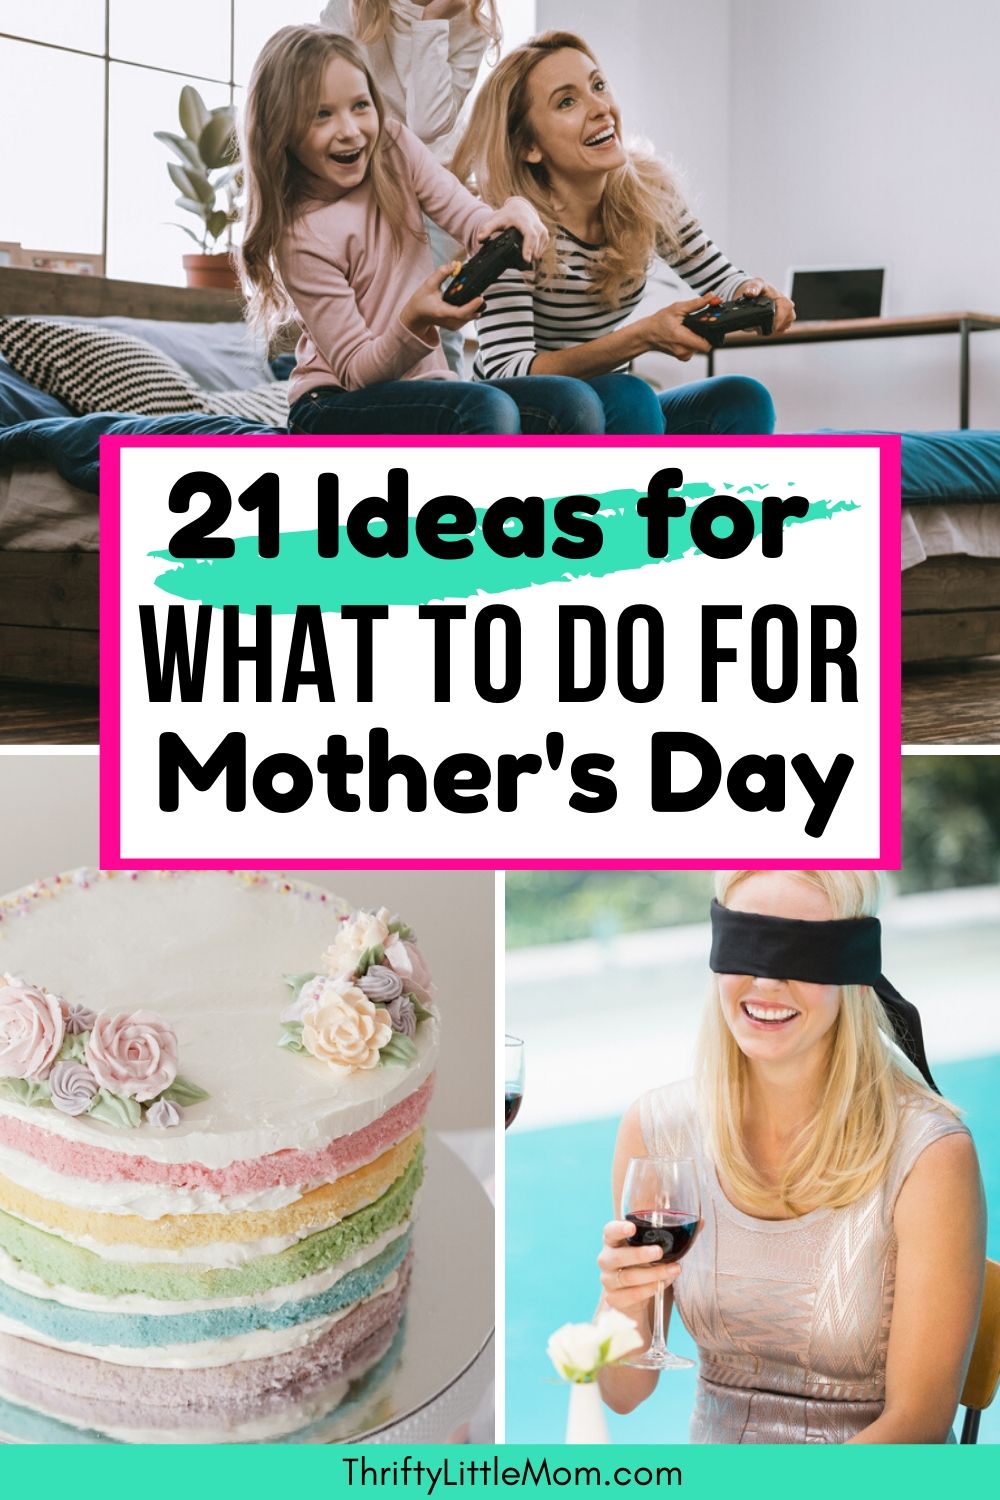 21 Ideas for What To Do For Mother's Day at Home or Out